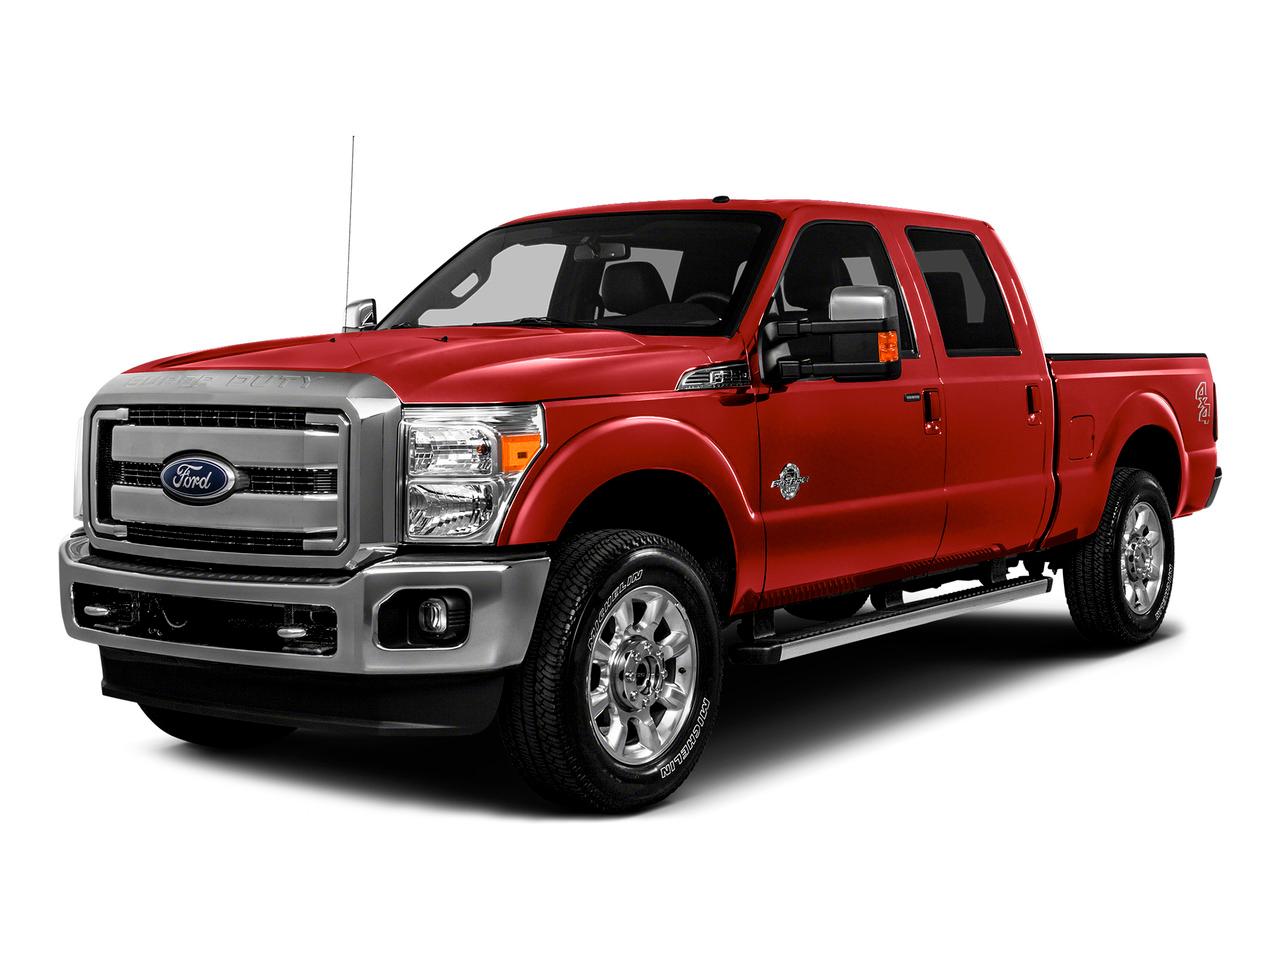 2016 Ford Super Duty F-250 SRW Vehicle Photo in Pilot Point, TX 76258-6053